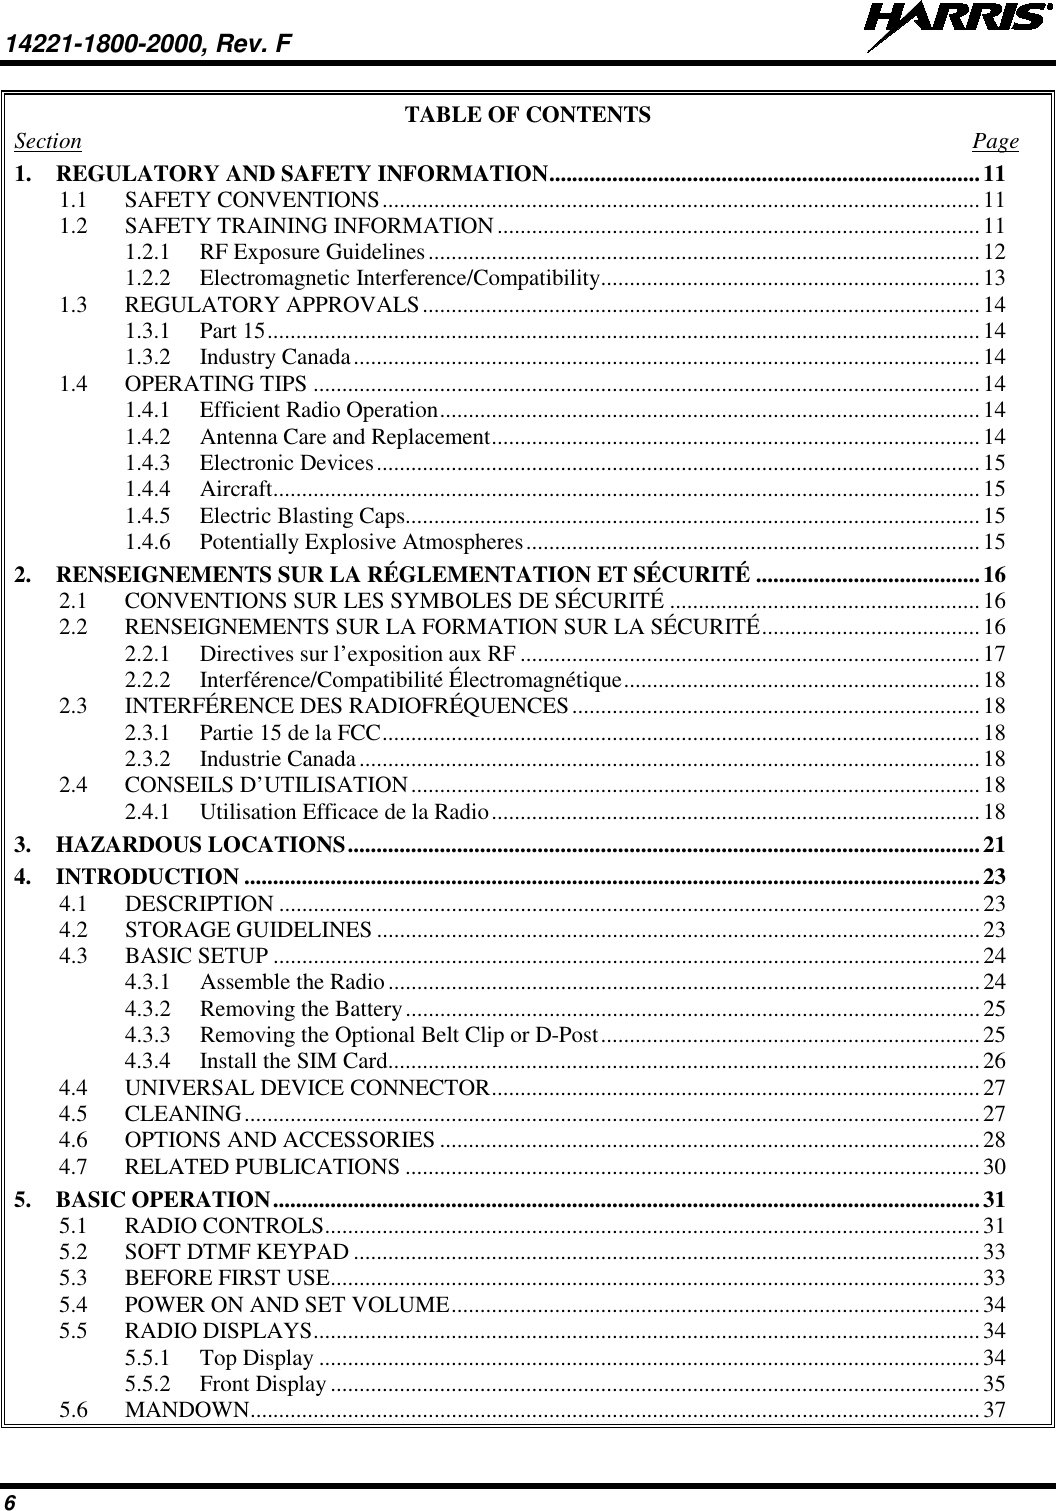 14221-1800-2000, Rev. F   6 TABLE OF CONTENTS Section  Page 1. REGULATORY AND SAFETY INFORMATION ........................................................................... 11 1.1 SAFETY CONVENTIONS ........................................................................................................ 11 1.2 SAFETY TRAINING INFORMATION .................................................................................... 11 1.2.1 RF Exposure Guidelines ................................................................................................ 12 1.2.2 Electromagnetic Interference/Compatibility .................................................................. 13 1.3 REGULATORY APPROVALS ................................................................................................. 14 1.3.1 Part 15 ............................................................................................................................ 14 1.3.2 Industry Canada ............................................................................................................. 14 1.4 OPERATING TIPS .................................................................................................................... 14 1.4.1 Efficient Radio Operation .............................................................................................. 14 1.4.2 Antenna Care and Replacement ..................................................................................... 14 1.4.3 Electronic Devices ......................................................................................................... 15 1.4.4 Aircraft ........................................................................................................................... 15 1.4.5 Electric Blasting Caps .................................................................................................... 15 1.4.6 Potentially Explosive Atmospheres ............................................................................... 15 2. RENSEIGNEMENTS SUR LA RÉGLEMENTATION ET SÉCURITÉ ....................................... 16 2.1 CONVENTIONS SUR LES SYMBOLES DE SÉCURITÉ ...................................................... 16 2.2 RENSEIGNEMENTS SUR LA FORMATION SUR LA SÉCURITÉ ...................................... 16 2.2.1 Directives sur l’exposition aux RF ................................................................................ 17 2.2.2 Interférence/Compatibilité Électromagnétique .............................................................. 18 2.3 INTERFÉRENCE DES RADIOFRÉQUENCES ....................................................................... 18 2.3.1 Partie 15 de la FCC ........................................................................................................ 18 2.3.2 Industrie Canada ............................................................................................................ 18 2.4 CONSEILS D’UTILISATION ................................................................................................... 18 2.4.1 Utilisation Efficace de la Radio ..................................................................................... 18 3. HAZARDOUS LOCATIONS .............................................................................................................. 21 4. INTRODUCTION ................................................................................................................................ 23 4.1 DESCRIPTION .......................................................................................................................... 23 4.2 STORAGE GUIDELINES ......................................................................................................... 23 4.3 BASIC SETUP ........................................................................................................................... 24 4.3.1 Assemble the Radio ....................................................................................................... 24 4.3.2 Removing the Battery .................................................................................................... 25 4.3.3 Removing the Optional Belt Clip or D-Post .................................................................. 25 4.3.4 Install the SIM Card ....................................................................................................... 26 4.4 UNIVERSAL DEVICE CONNECTOR ..................................................................................... 27 4.5 CLEANING ................................................................................................................................ 27 4.6 OPTIONS AND ACCESSORIES .............................................................................................. 28 4.7 RELATED PUBLICATIONS .................................................................................................... 30 5. BASIC OPERATION ........................................................................................................................... 31 5.1 RADIO CONTROLS .................................................................................................................. 31 5.2 SOFT DTMF KEYPAD ............................................................................................................. 33 5.3 BEFORE FIRST USE ................................................................................................................. 33 5.4 POWER ON AND SET VOLUME ............................................................................................ 34 5.5 RADIO DISPLAYS .................................................................................................................... 34 5.5.1 Top Display ................................................................................................................... 34 5.5.2 Front Display ................................................................................................................. 35 5.6 MANDOWN ............................................................................................................................... 37 